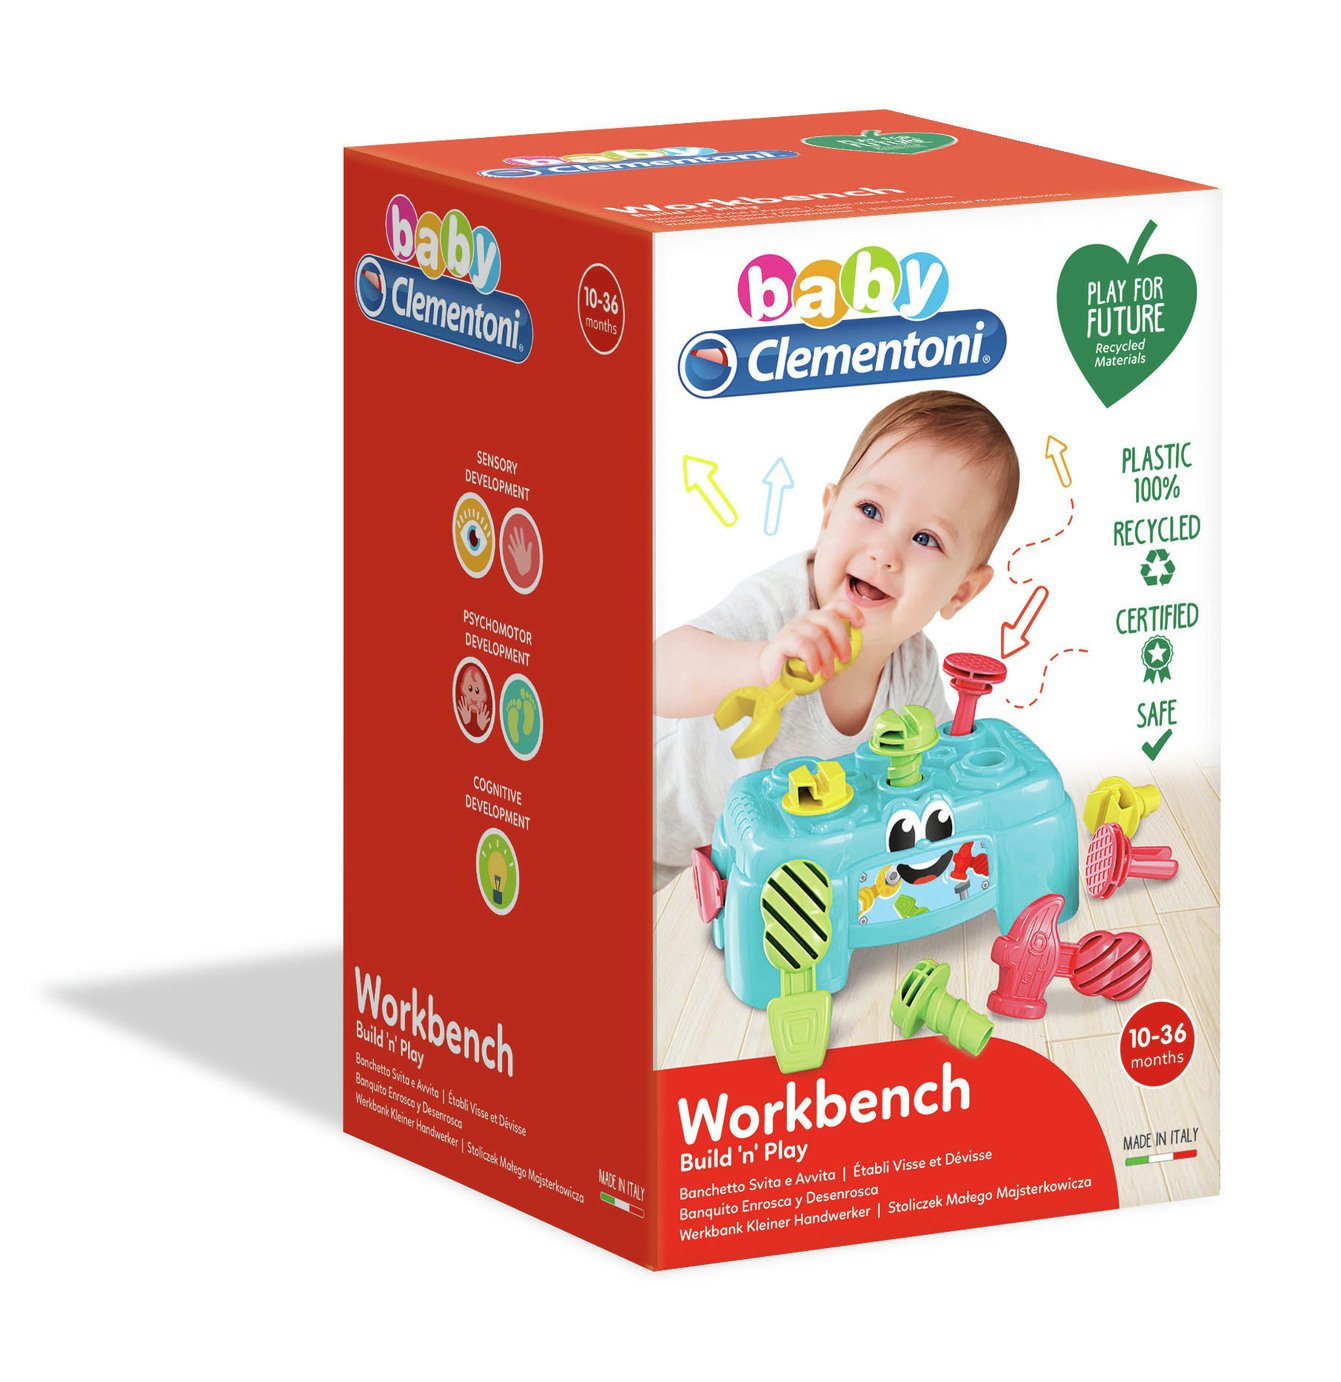 Baby Clementoni ECO Toy Workbench Review